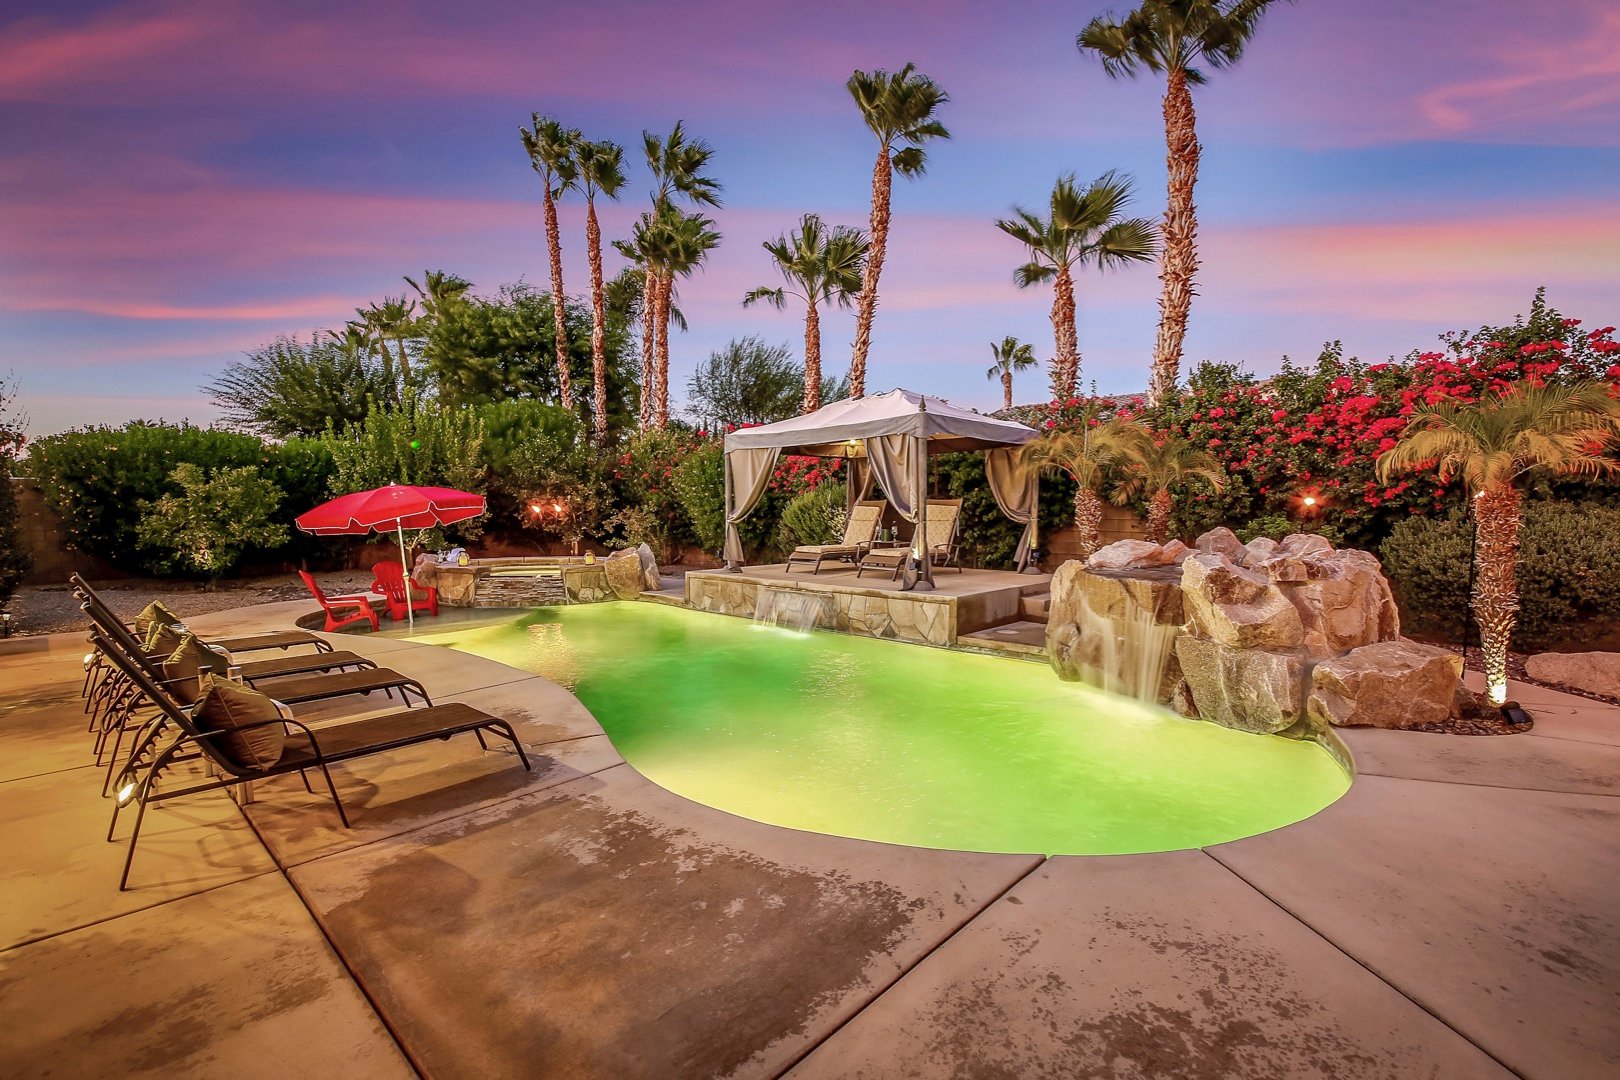 Vacay Stay invites you to unwind and relax in this large backyard with so much room to entertain.